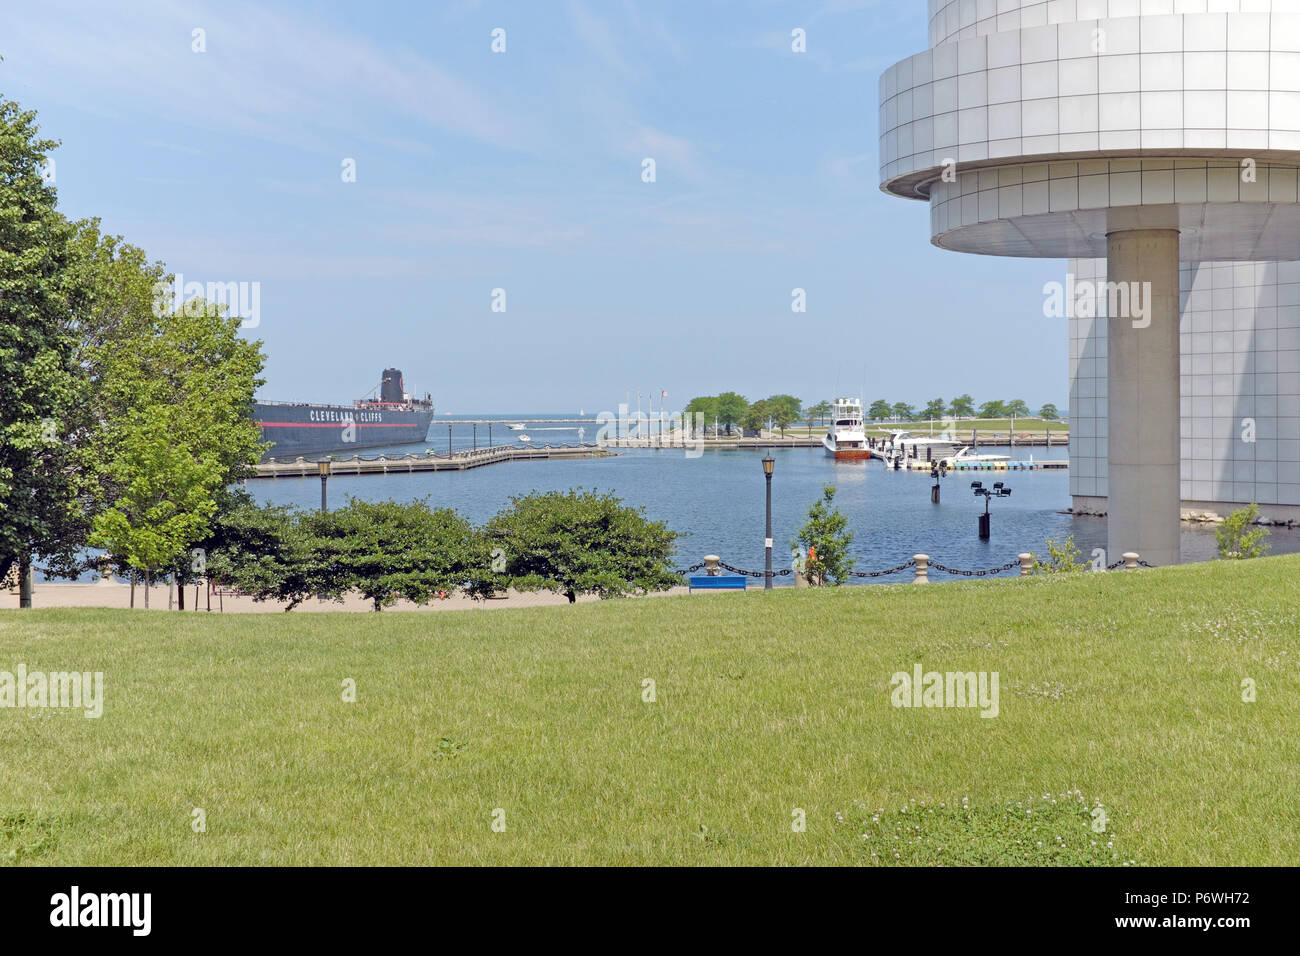 Cleveland, USA.  July 2, 2018. The Cleveland FBI announced on July 2, 2018 their apprehension of a suspected terrorist with plans to commit acts of terror at the July 4, 2018 celebration in Voinovich Park and nearby sites.  The Northcoast Harbor area is planned on being the epicentre of the celebration and fireworks display. Credit: Mark Kanning/Alamy Live News Stock Photo